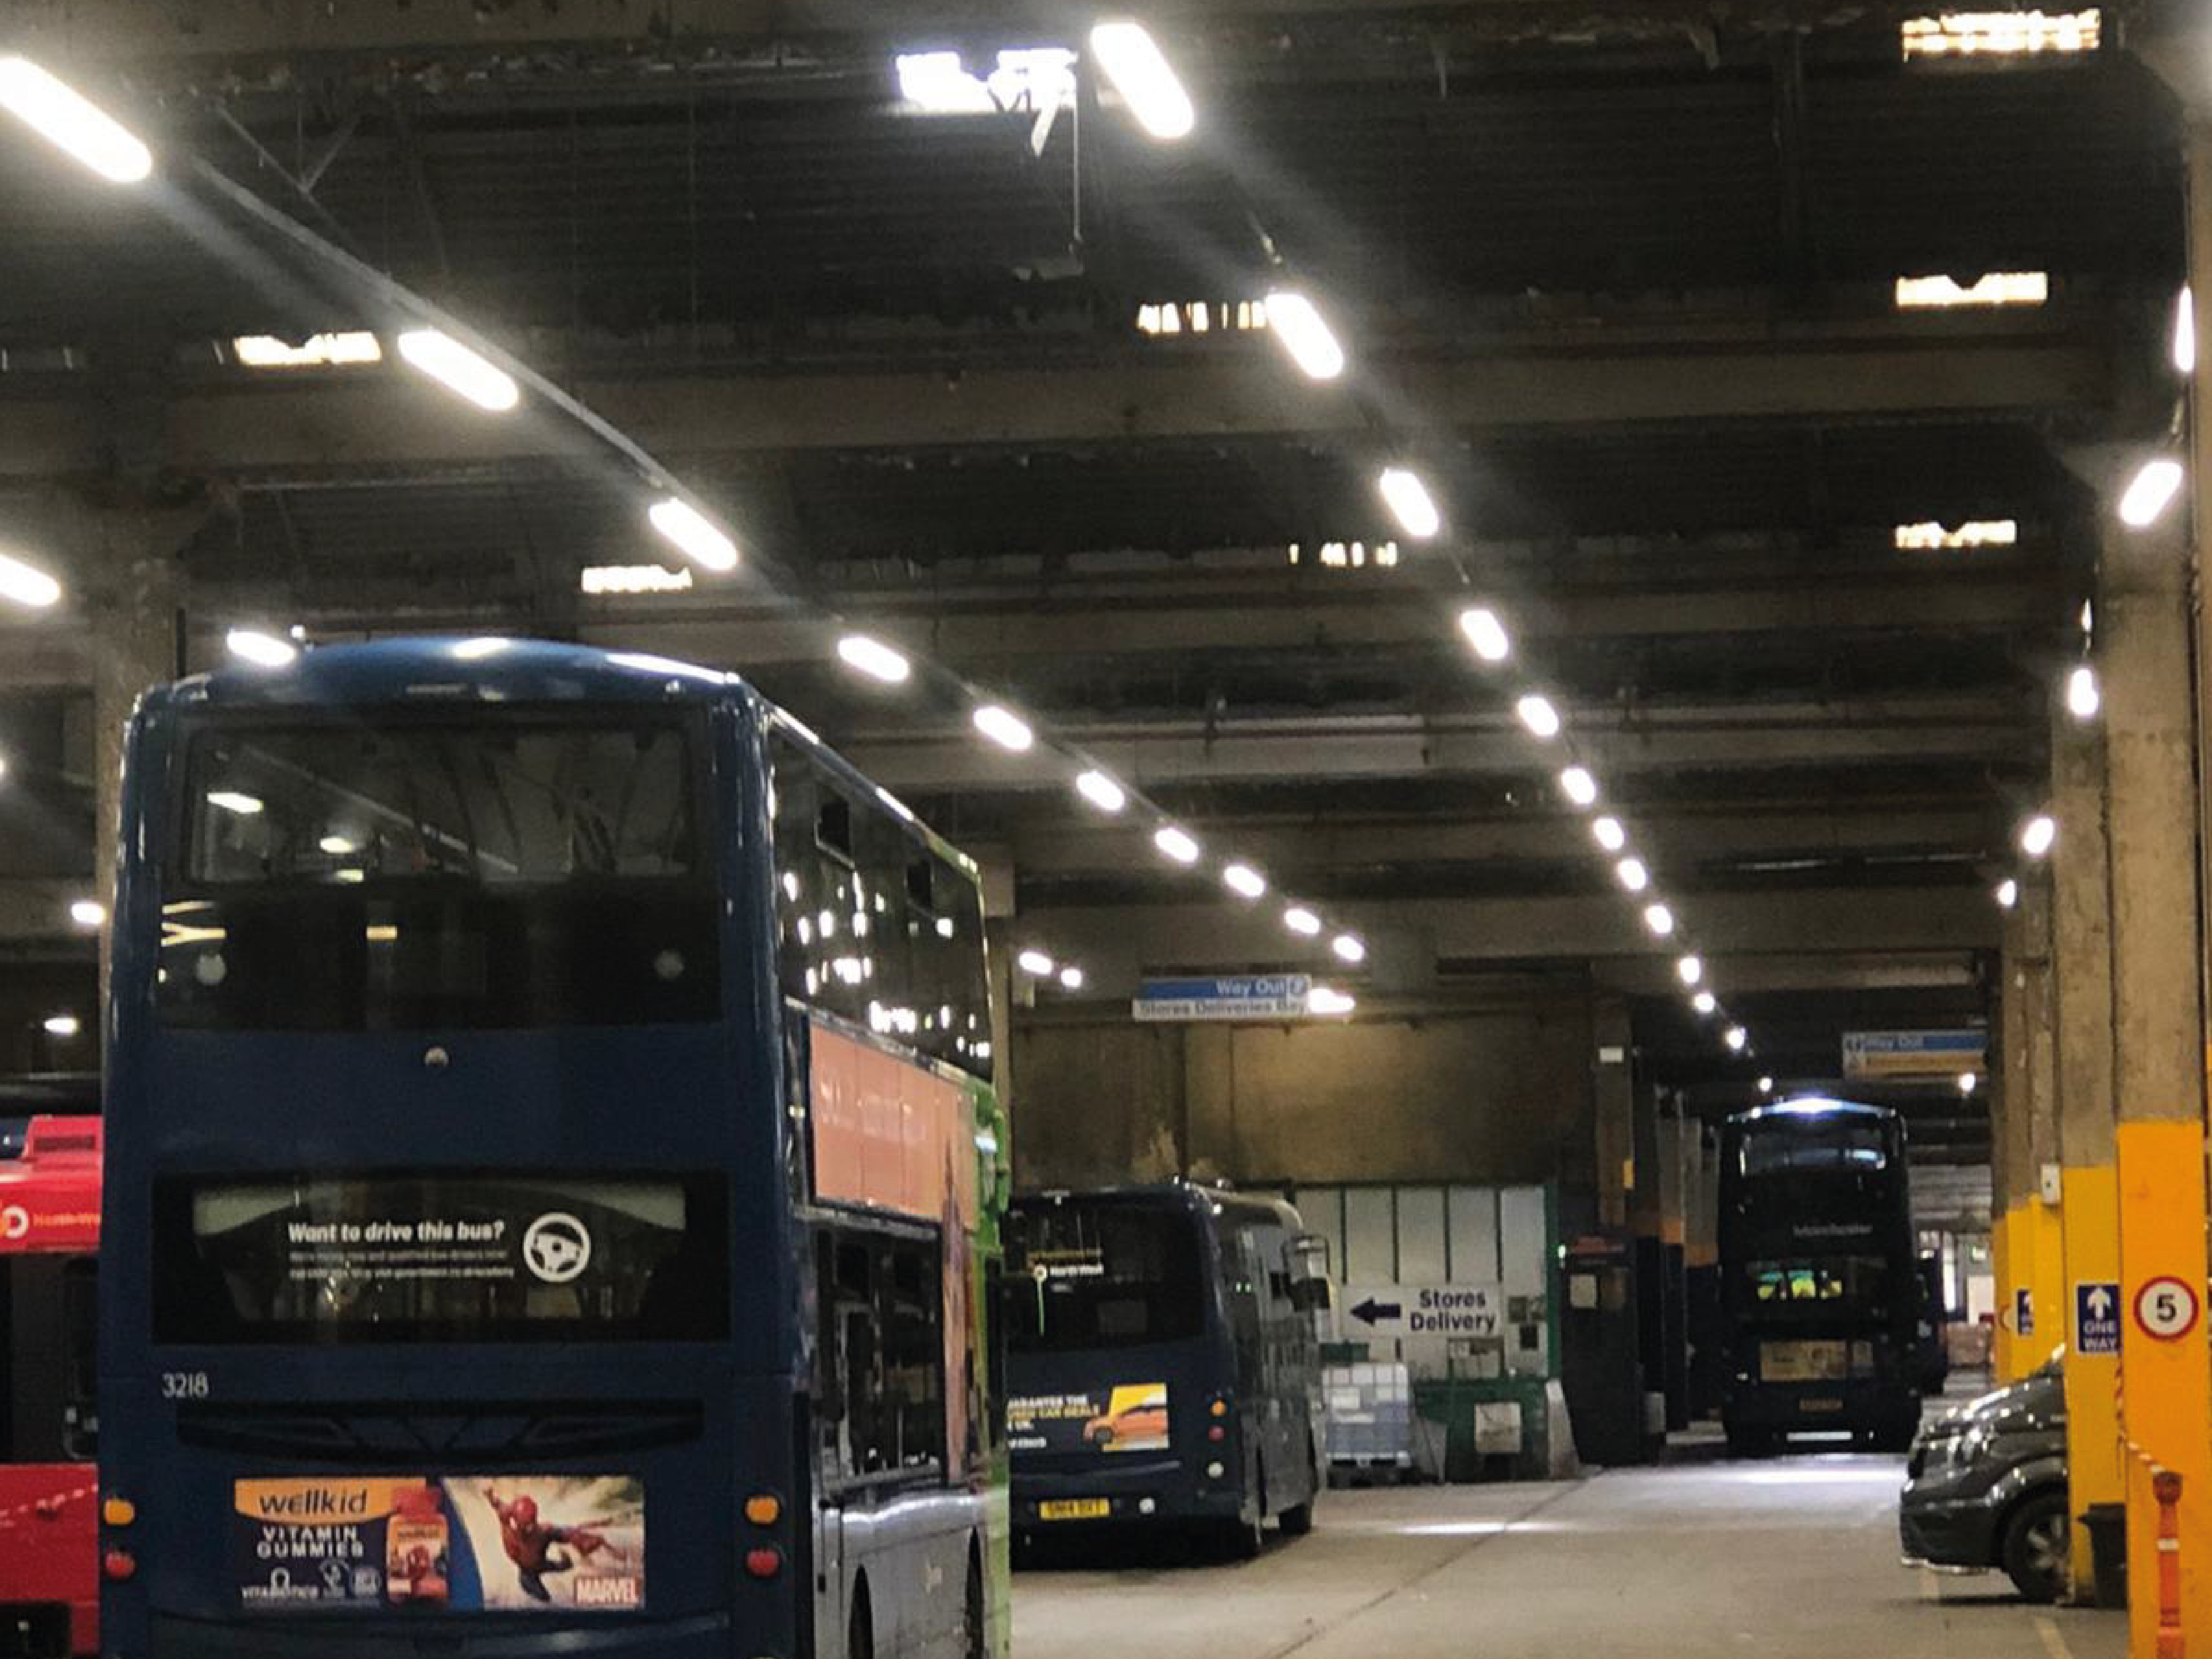 Go North West bus depot after picture of EES Group LED installation